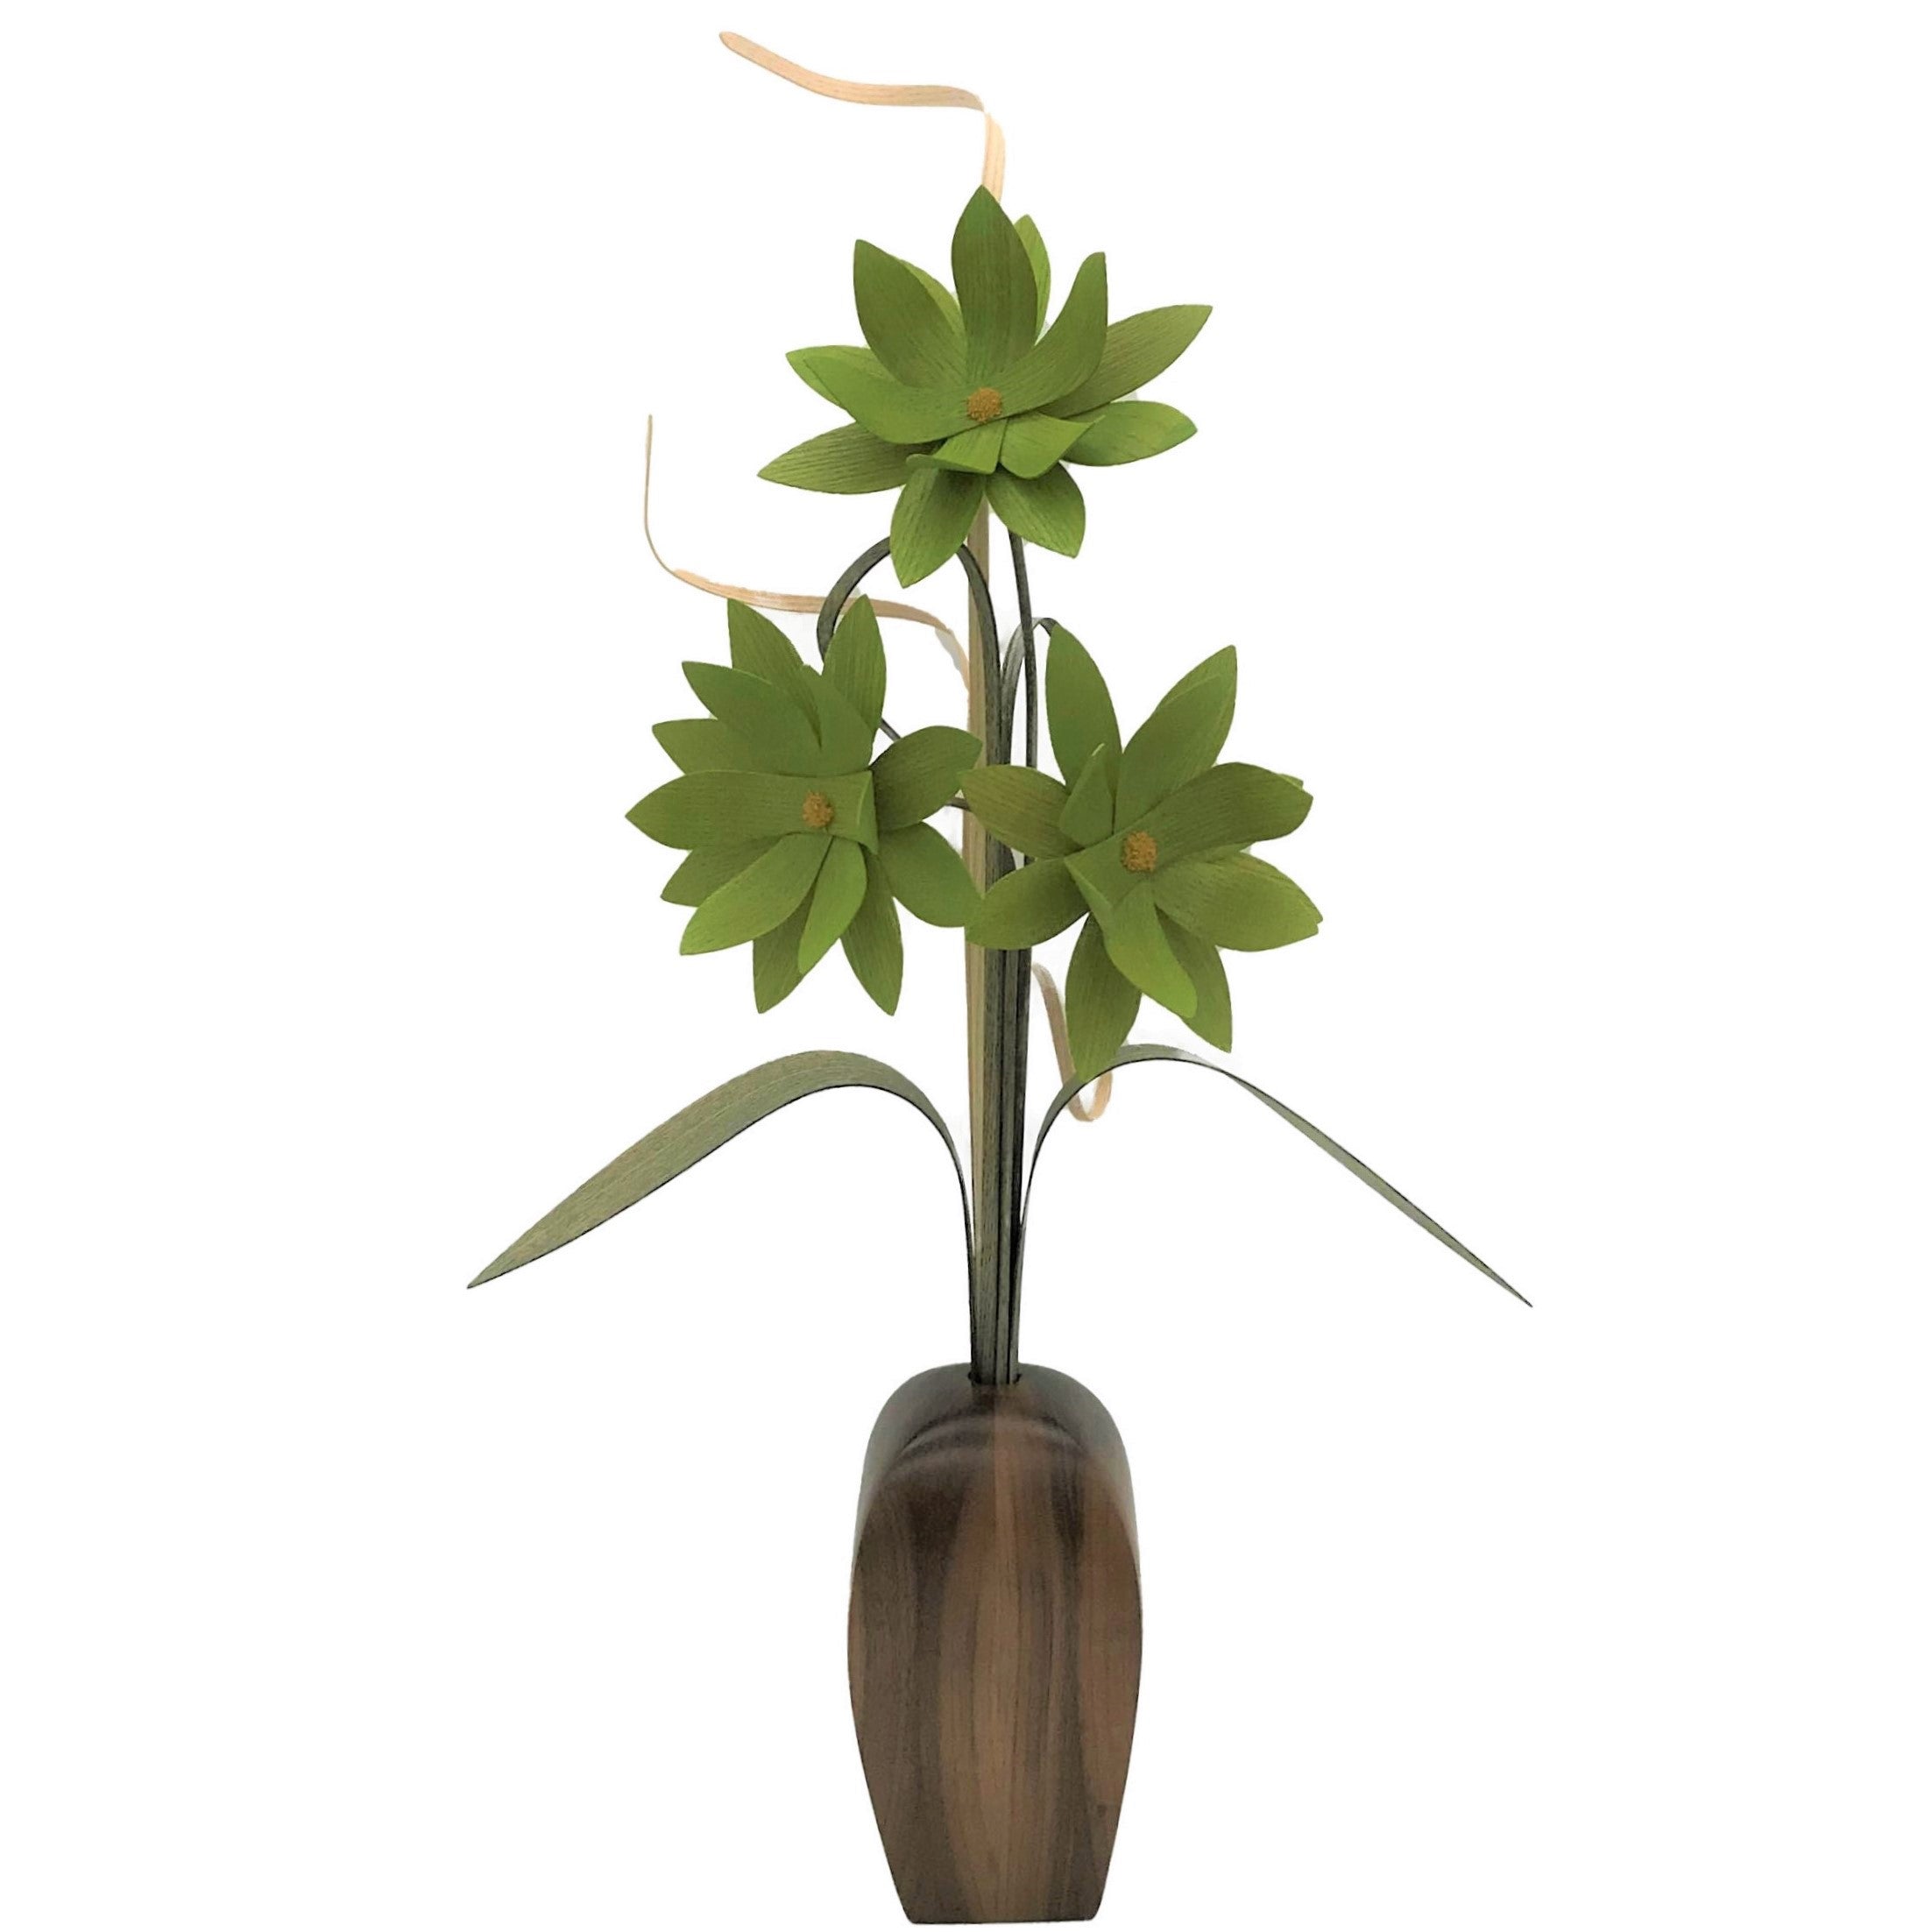 Wood Wildflowers - Walnut Expressions Vase with Three Flowers